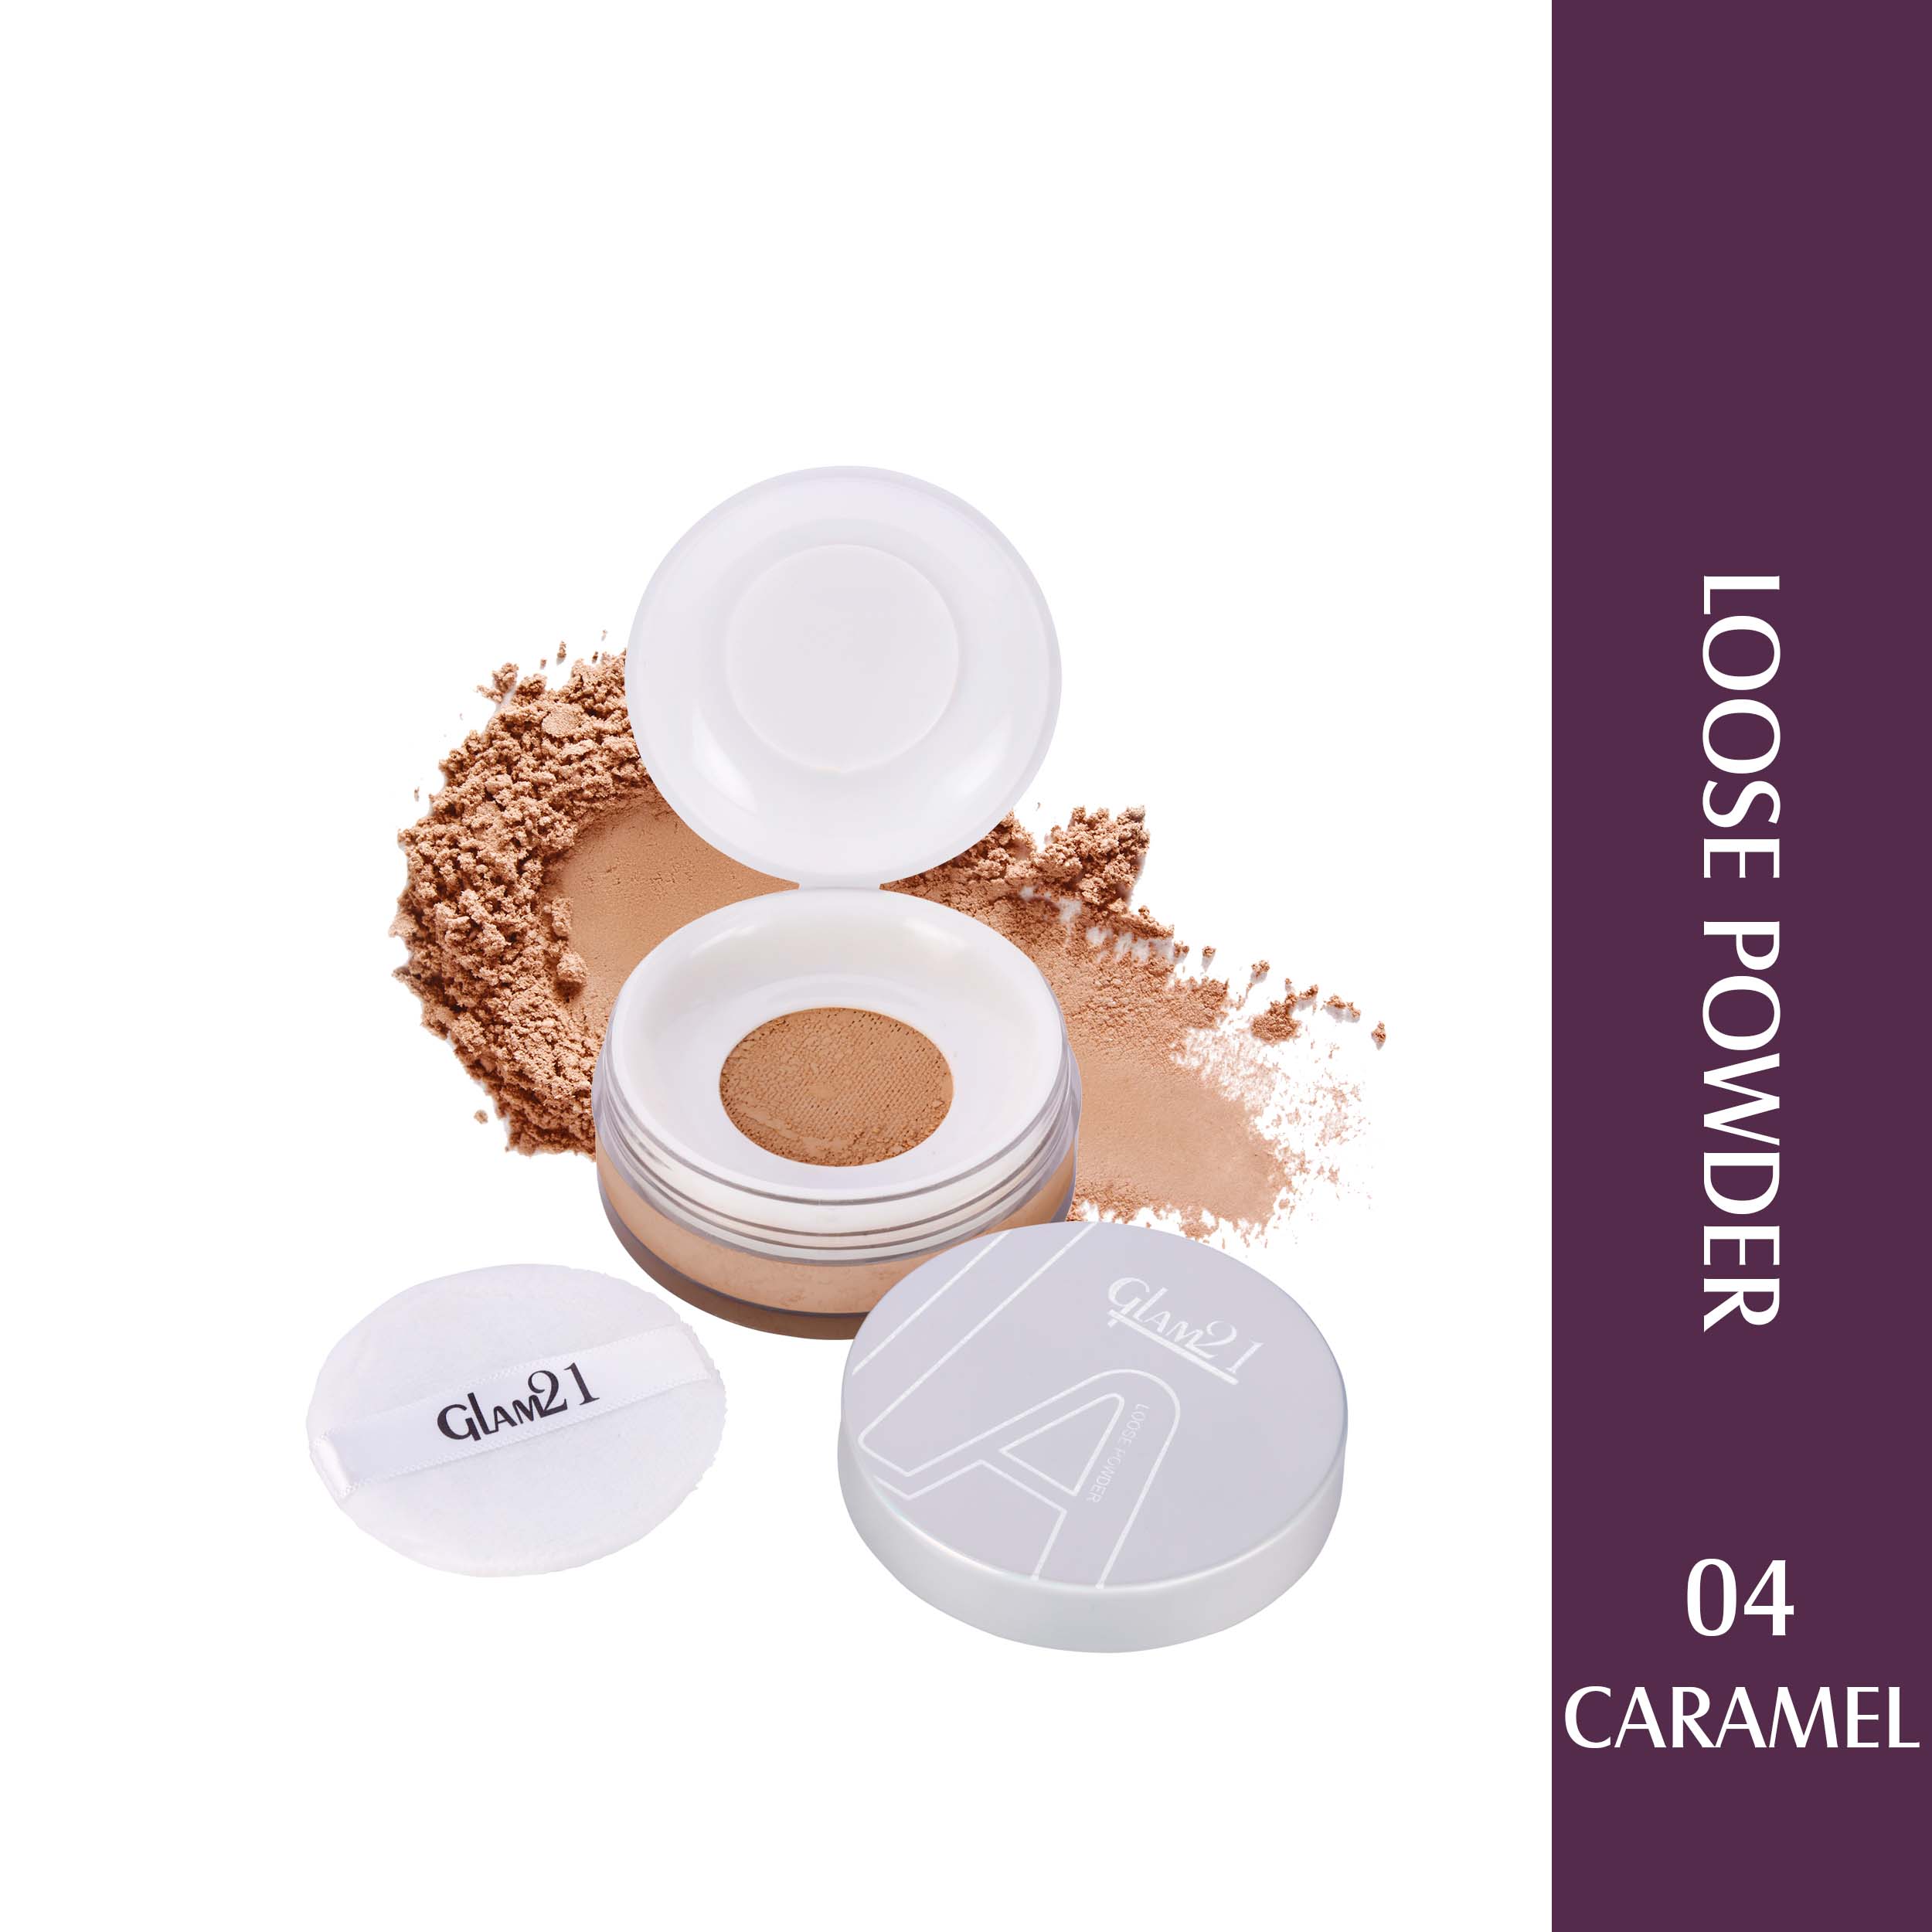 Glam21 Loose Face Powder Compact, 8 g Absorb Excess Oil & Sweat | Give the Best Sheer Finish Compact, 8 g (Caramel)